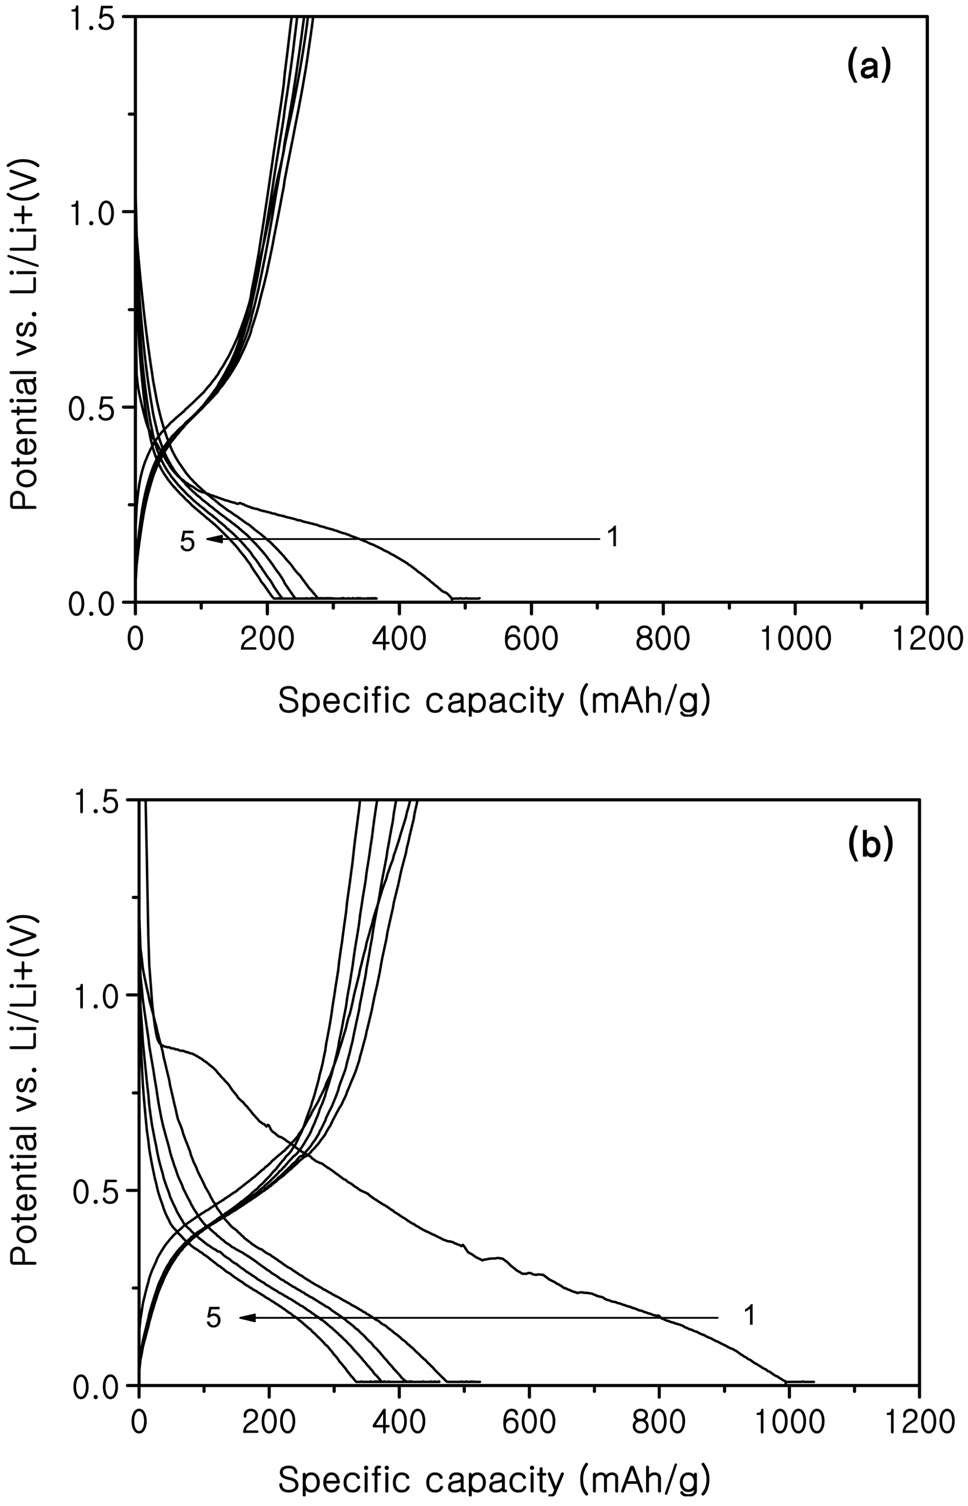 Charge-discharge curves of SnO2-SiO2 composite without carbon coating at different heating conditions; (a) 300 ℃ and (b) 900 ℃.